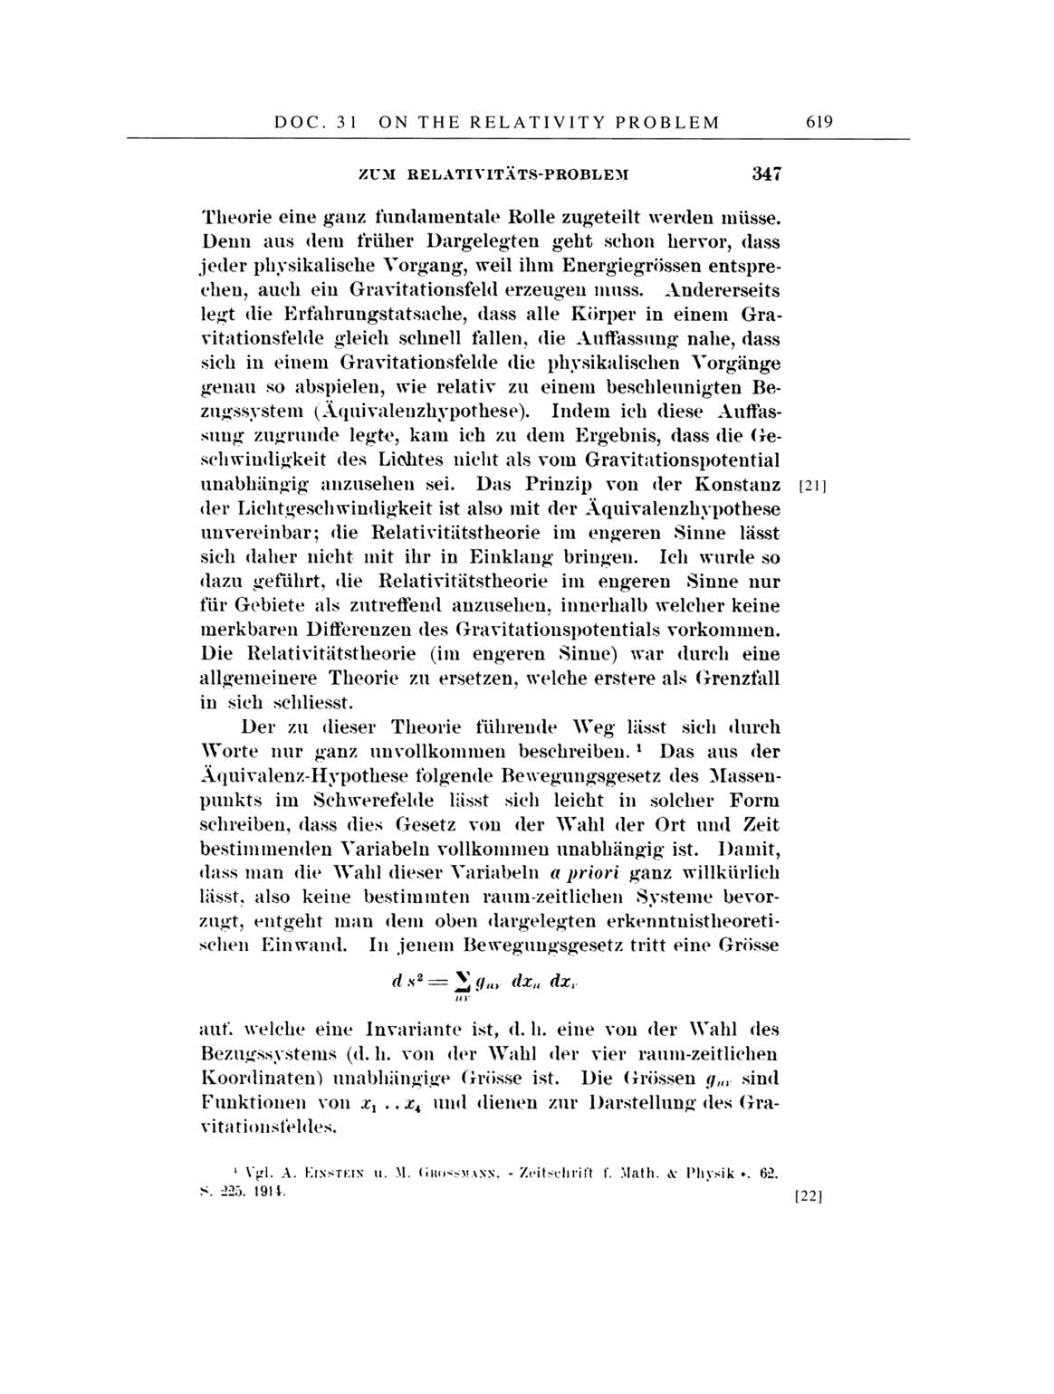 Volume 4: The Swiss Years: Writings 1912-1914 page 619